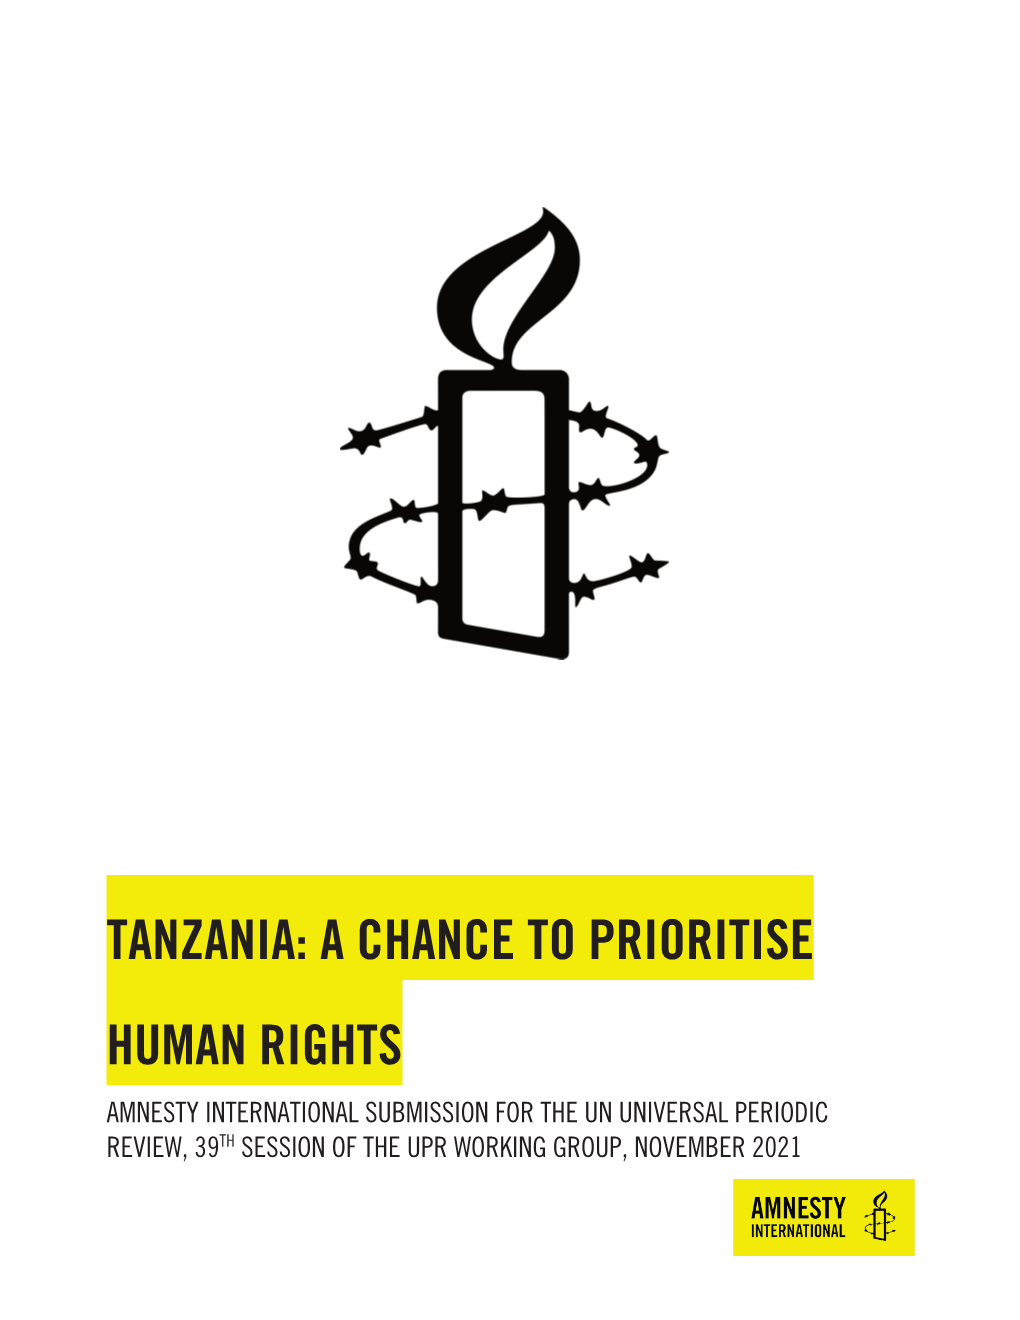 Tanzania: a Chance to Prioritize Human Rights